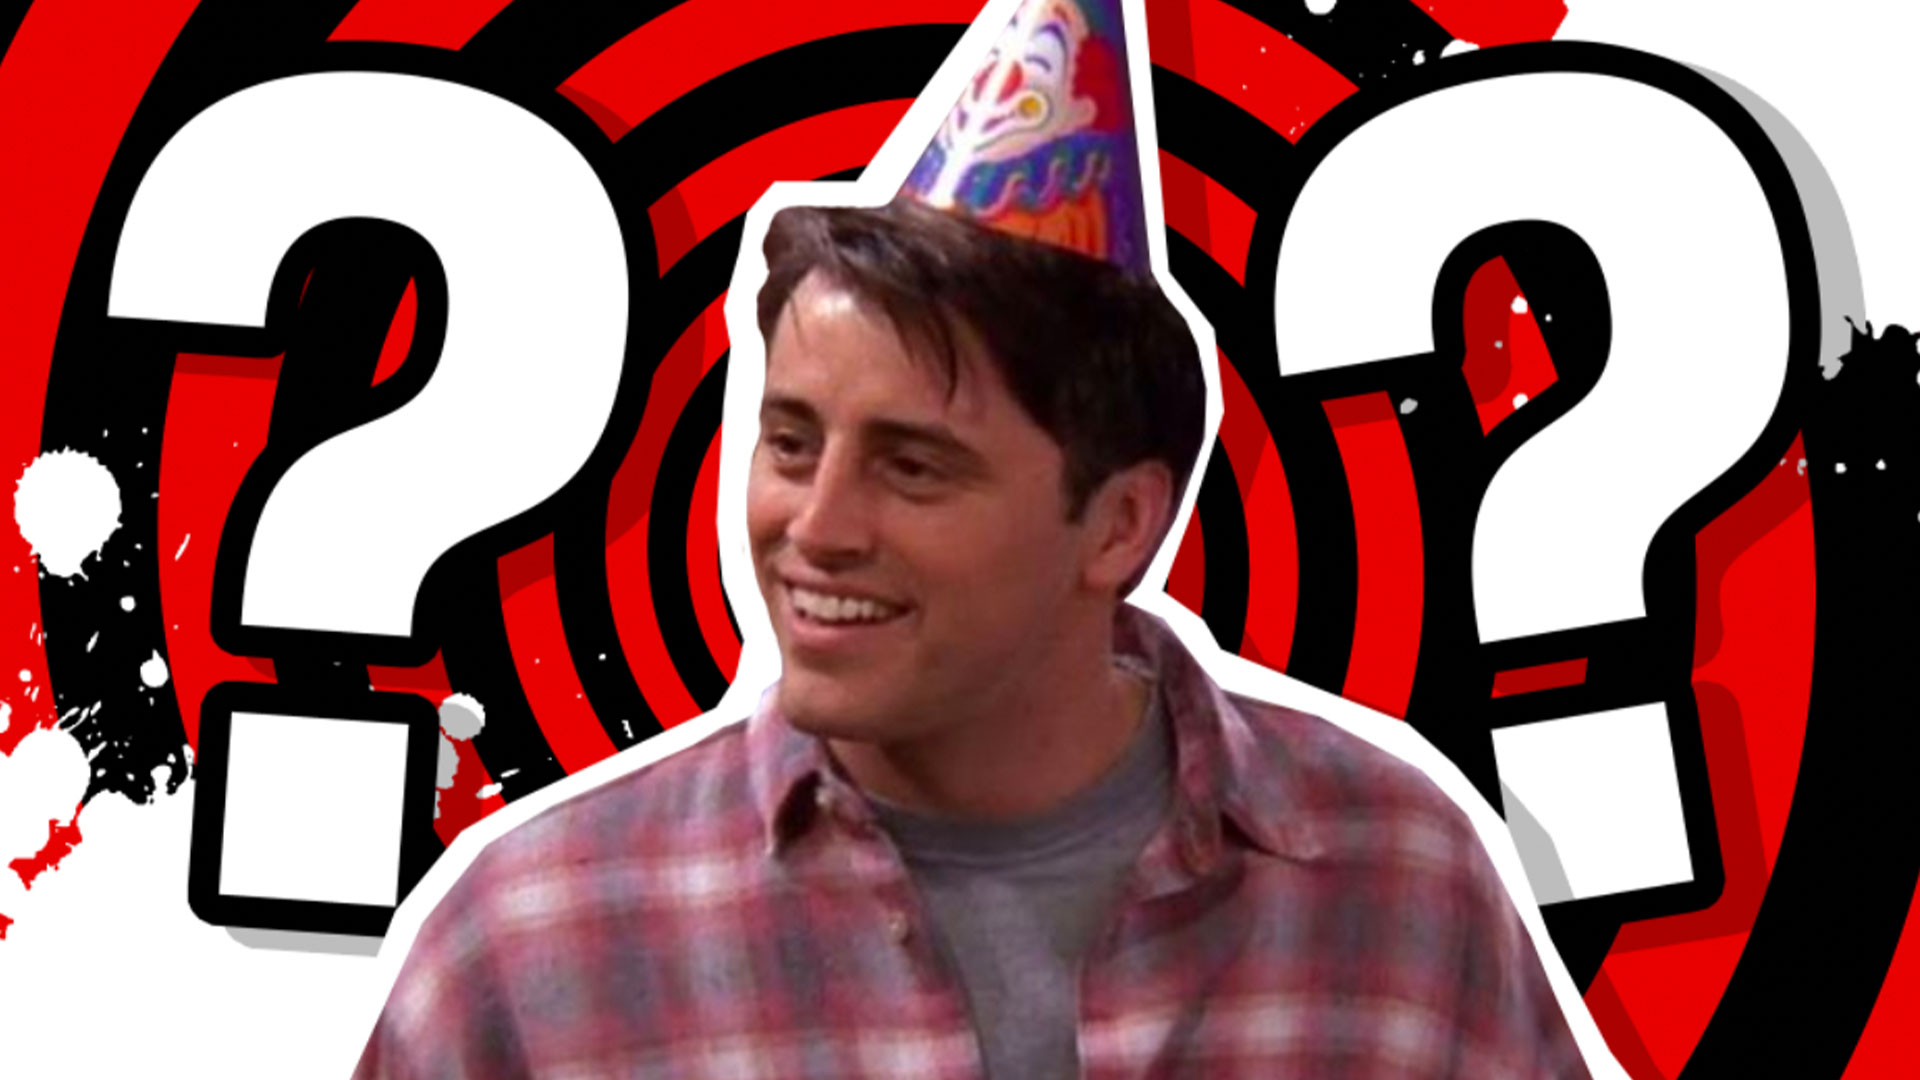 What Percentage Joey Tribbiani are You?